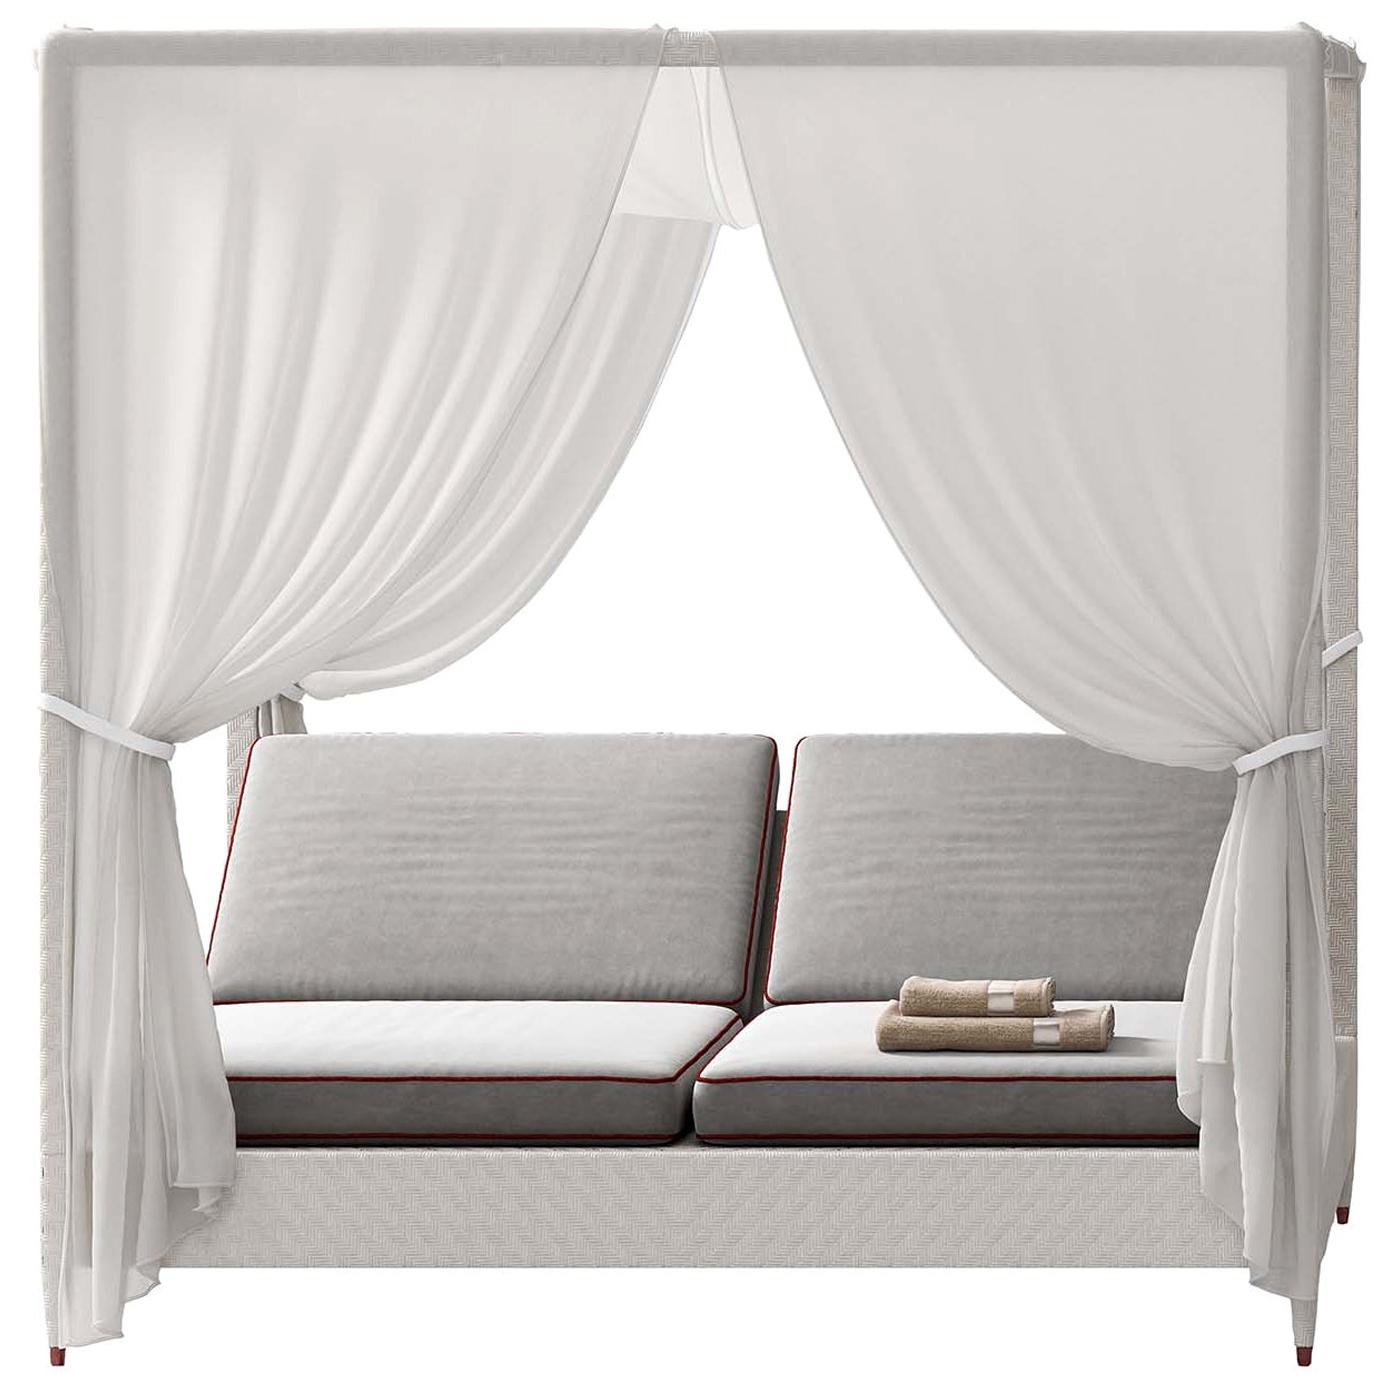 White 2-Seat Daybed with Canopy